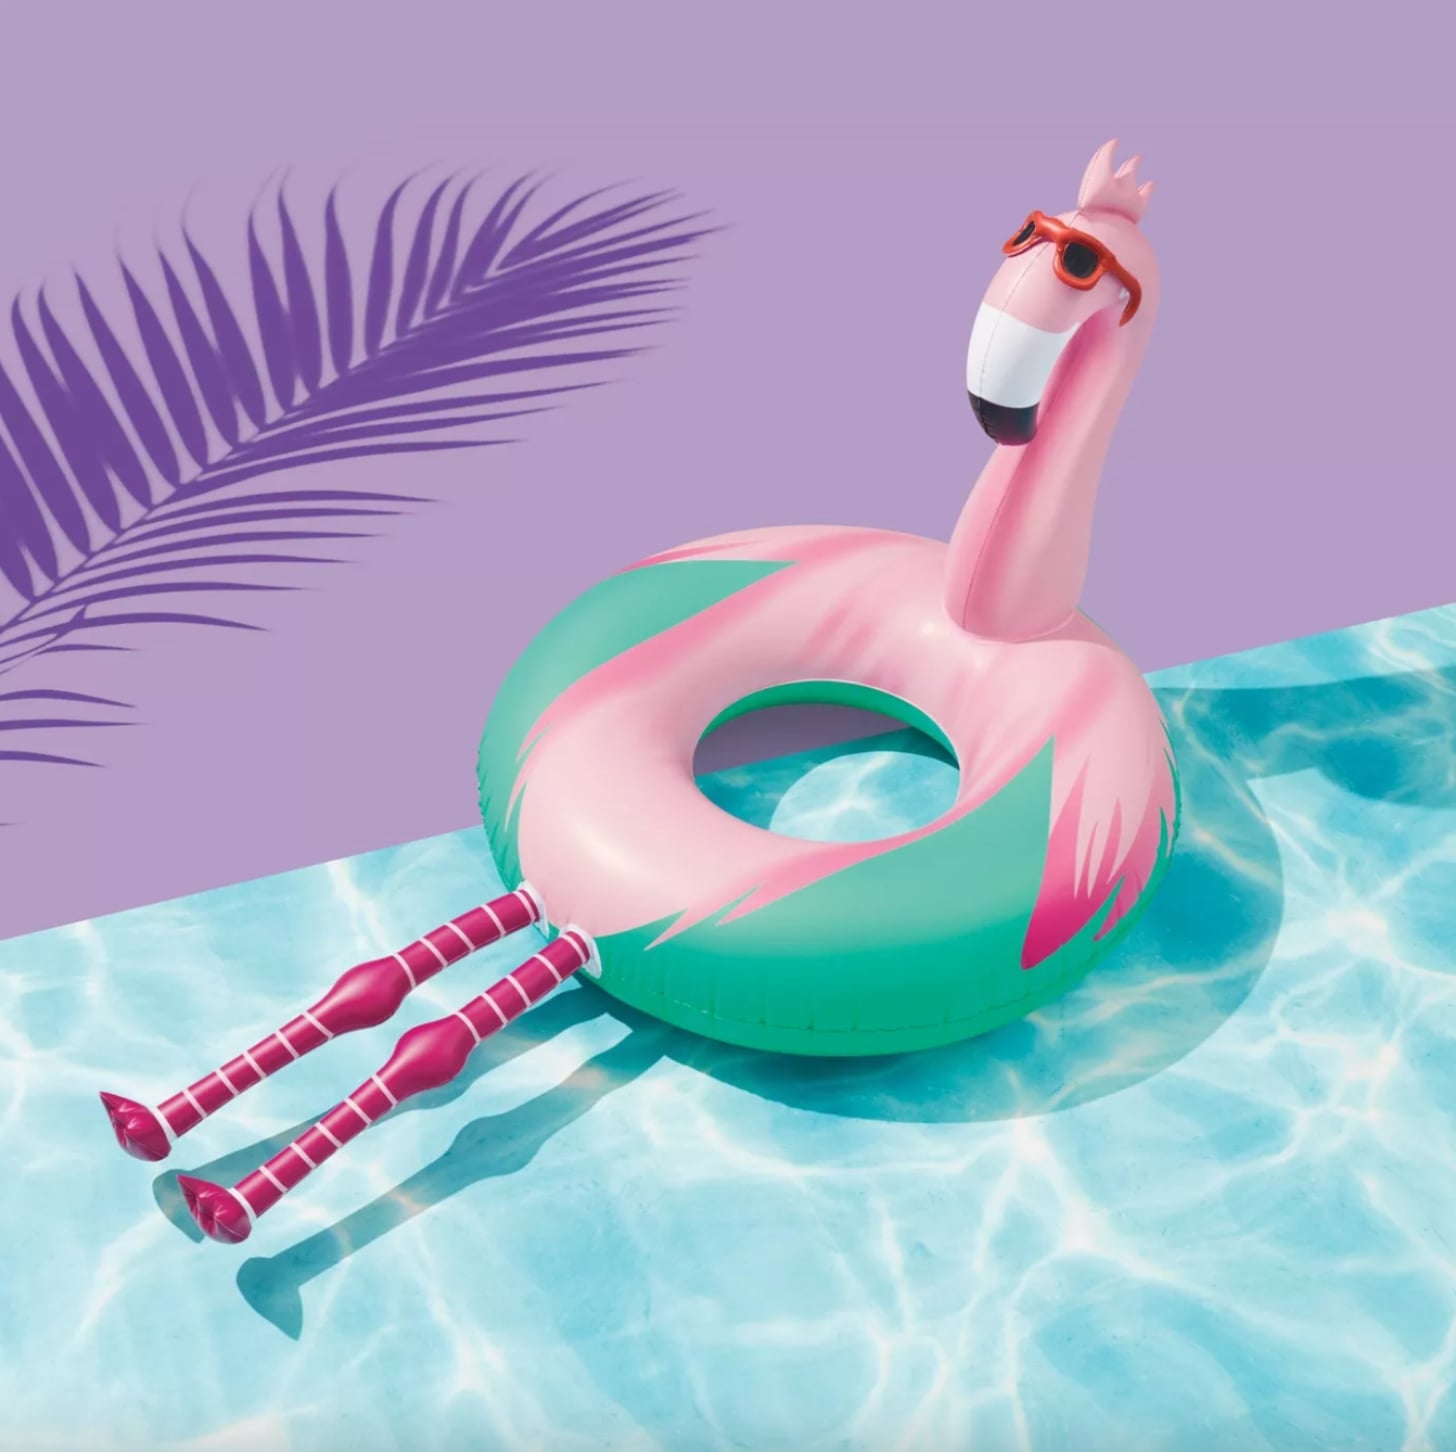 pianist fout Uitgraving Target's Selling a $10 Flamingo Pool Float With Legs | POPSUGAR Smart Living